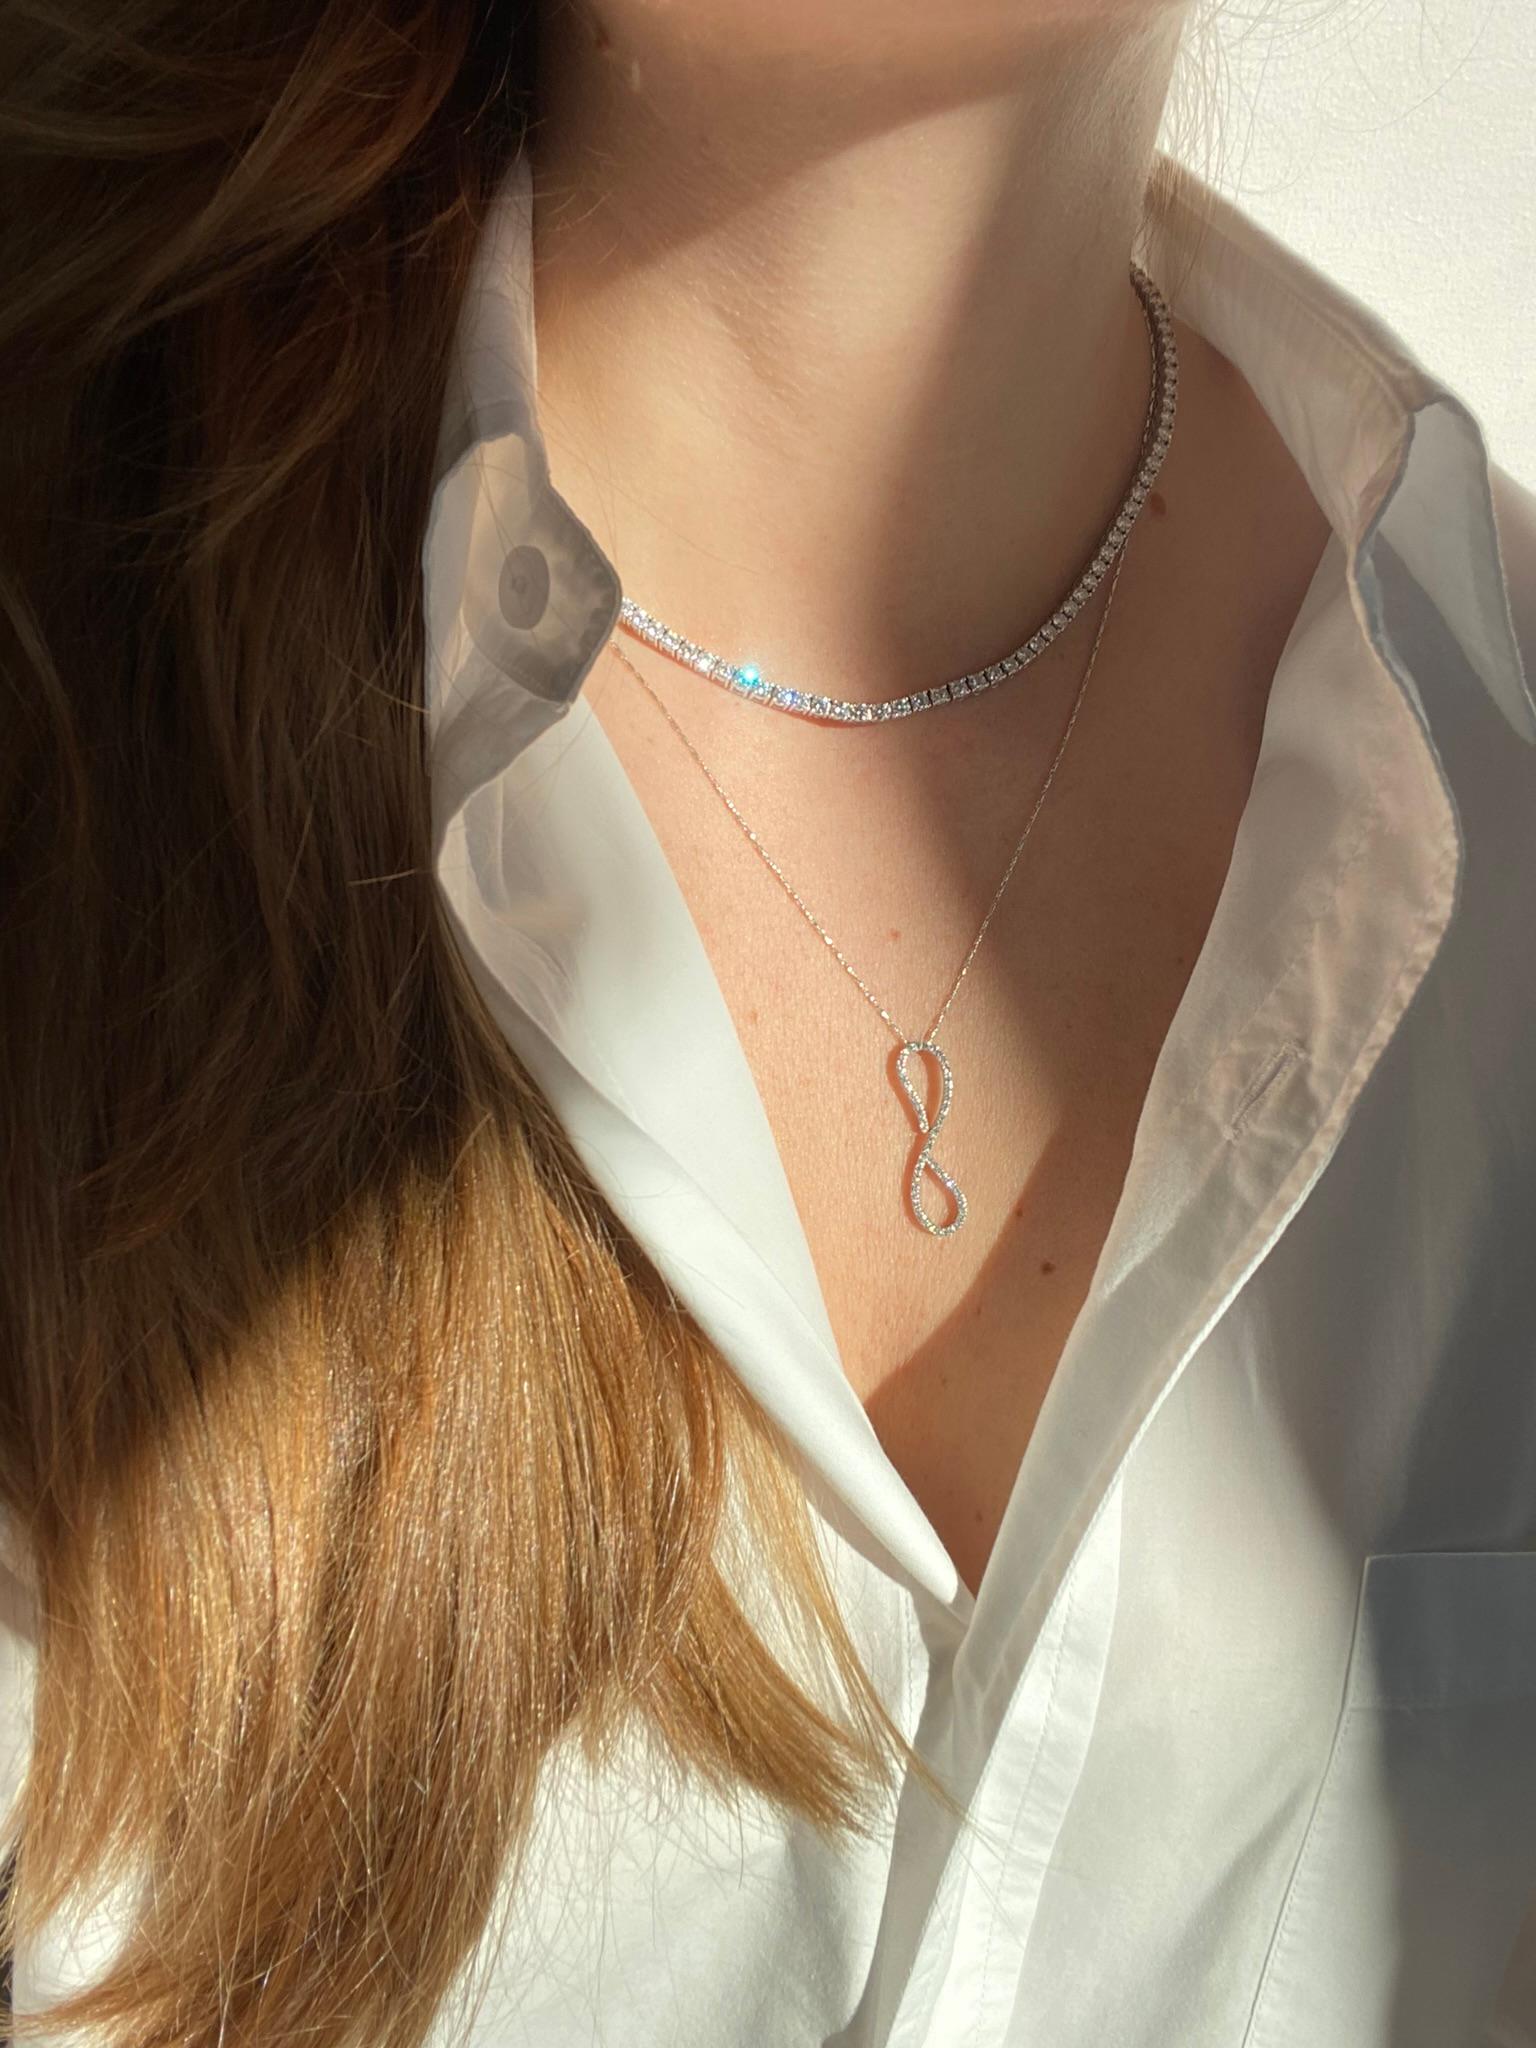 Our signature TAYLOR Necklace offers a stunning combination of versatility and elegance. Wear it alone or attach a custom pendant for a look that can take you from day to night. 

The best feature is that you may customize multiple pendants for use